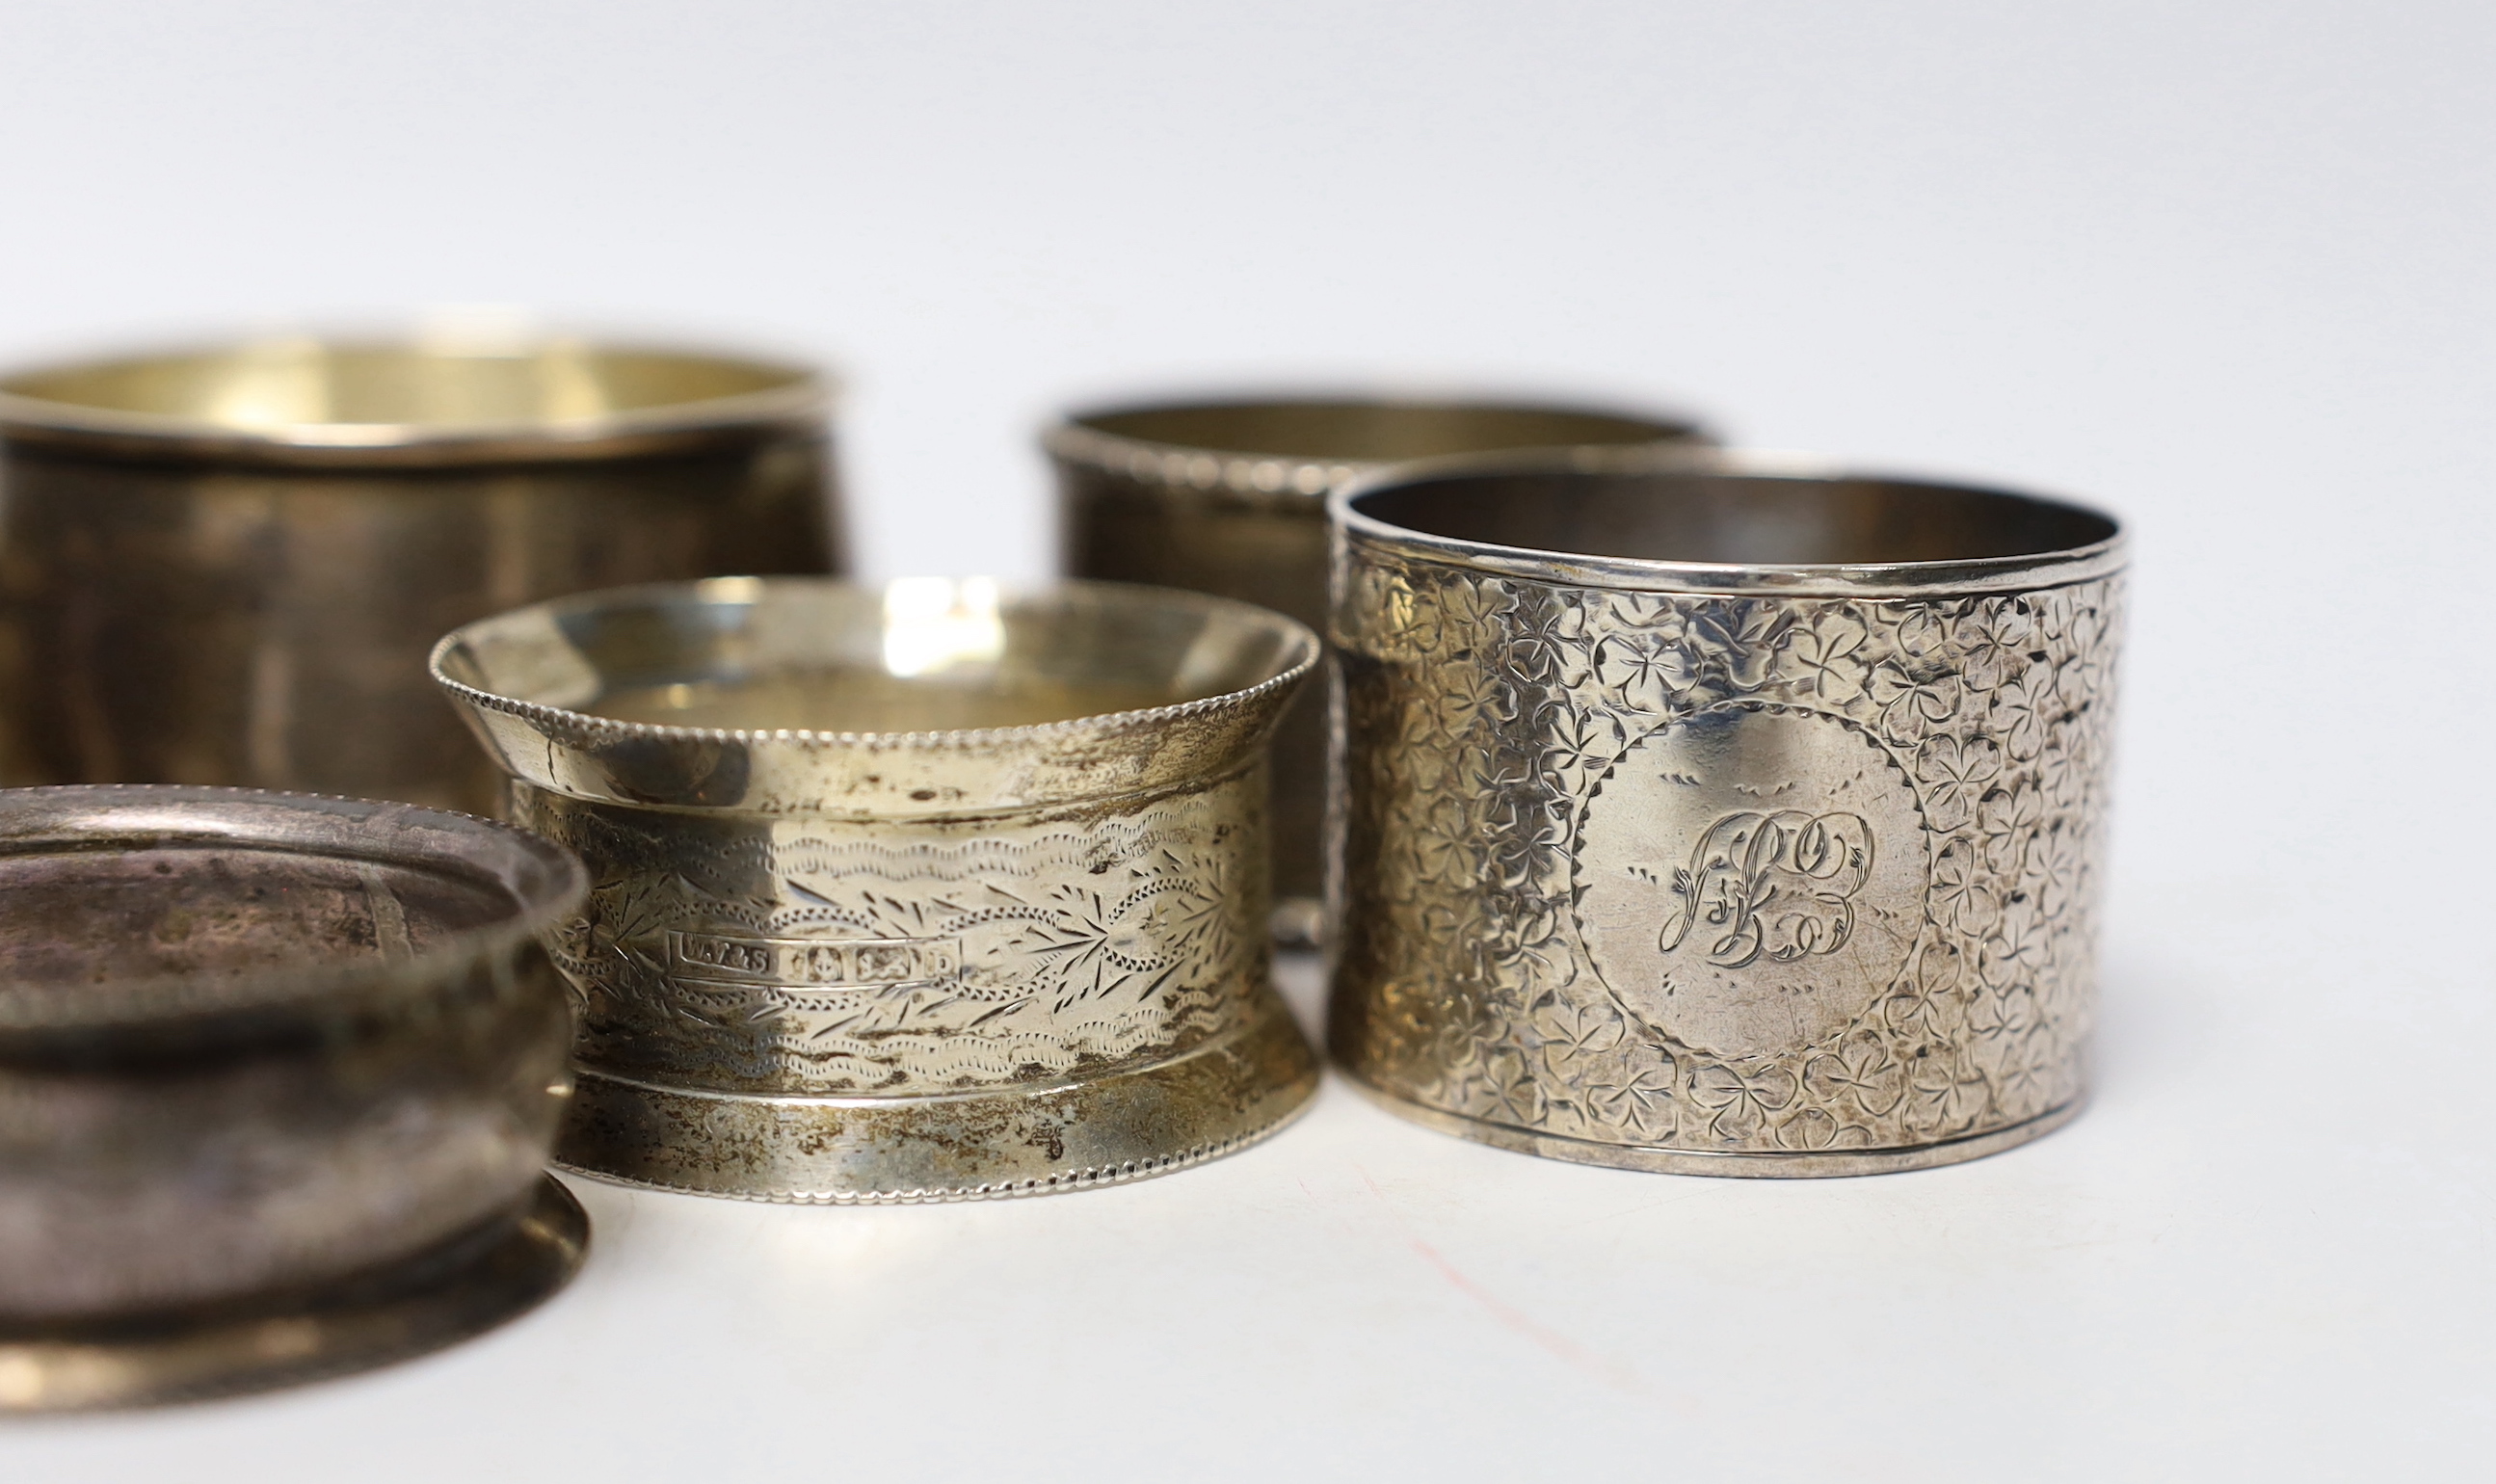 Seven assorted silver napkin rings and a small silver bowl